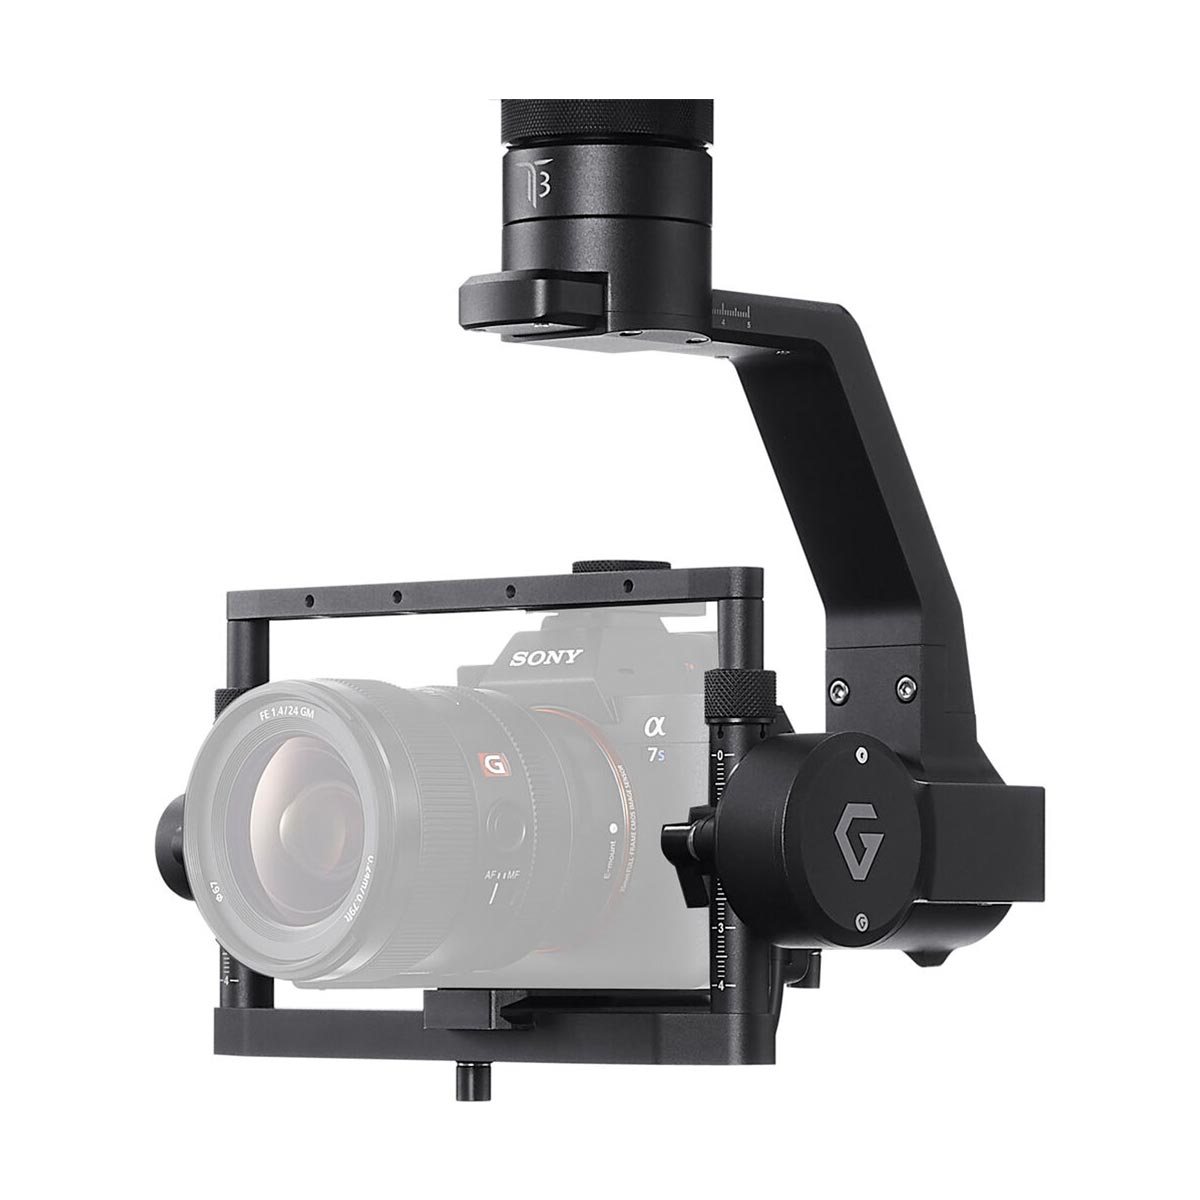 Sony Gremsy Gimbal T3 for Airpeak S1 Drone